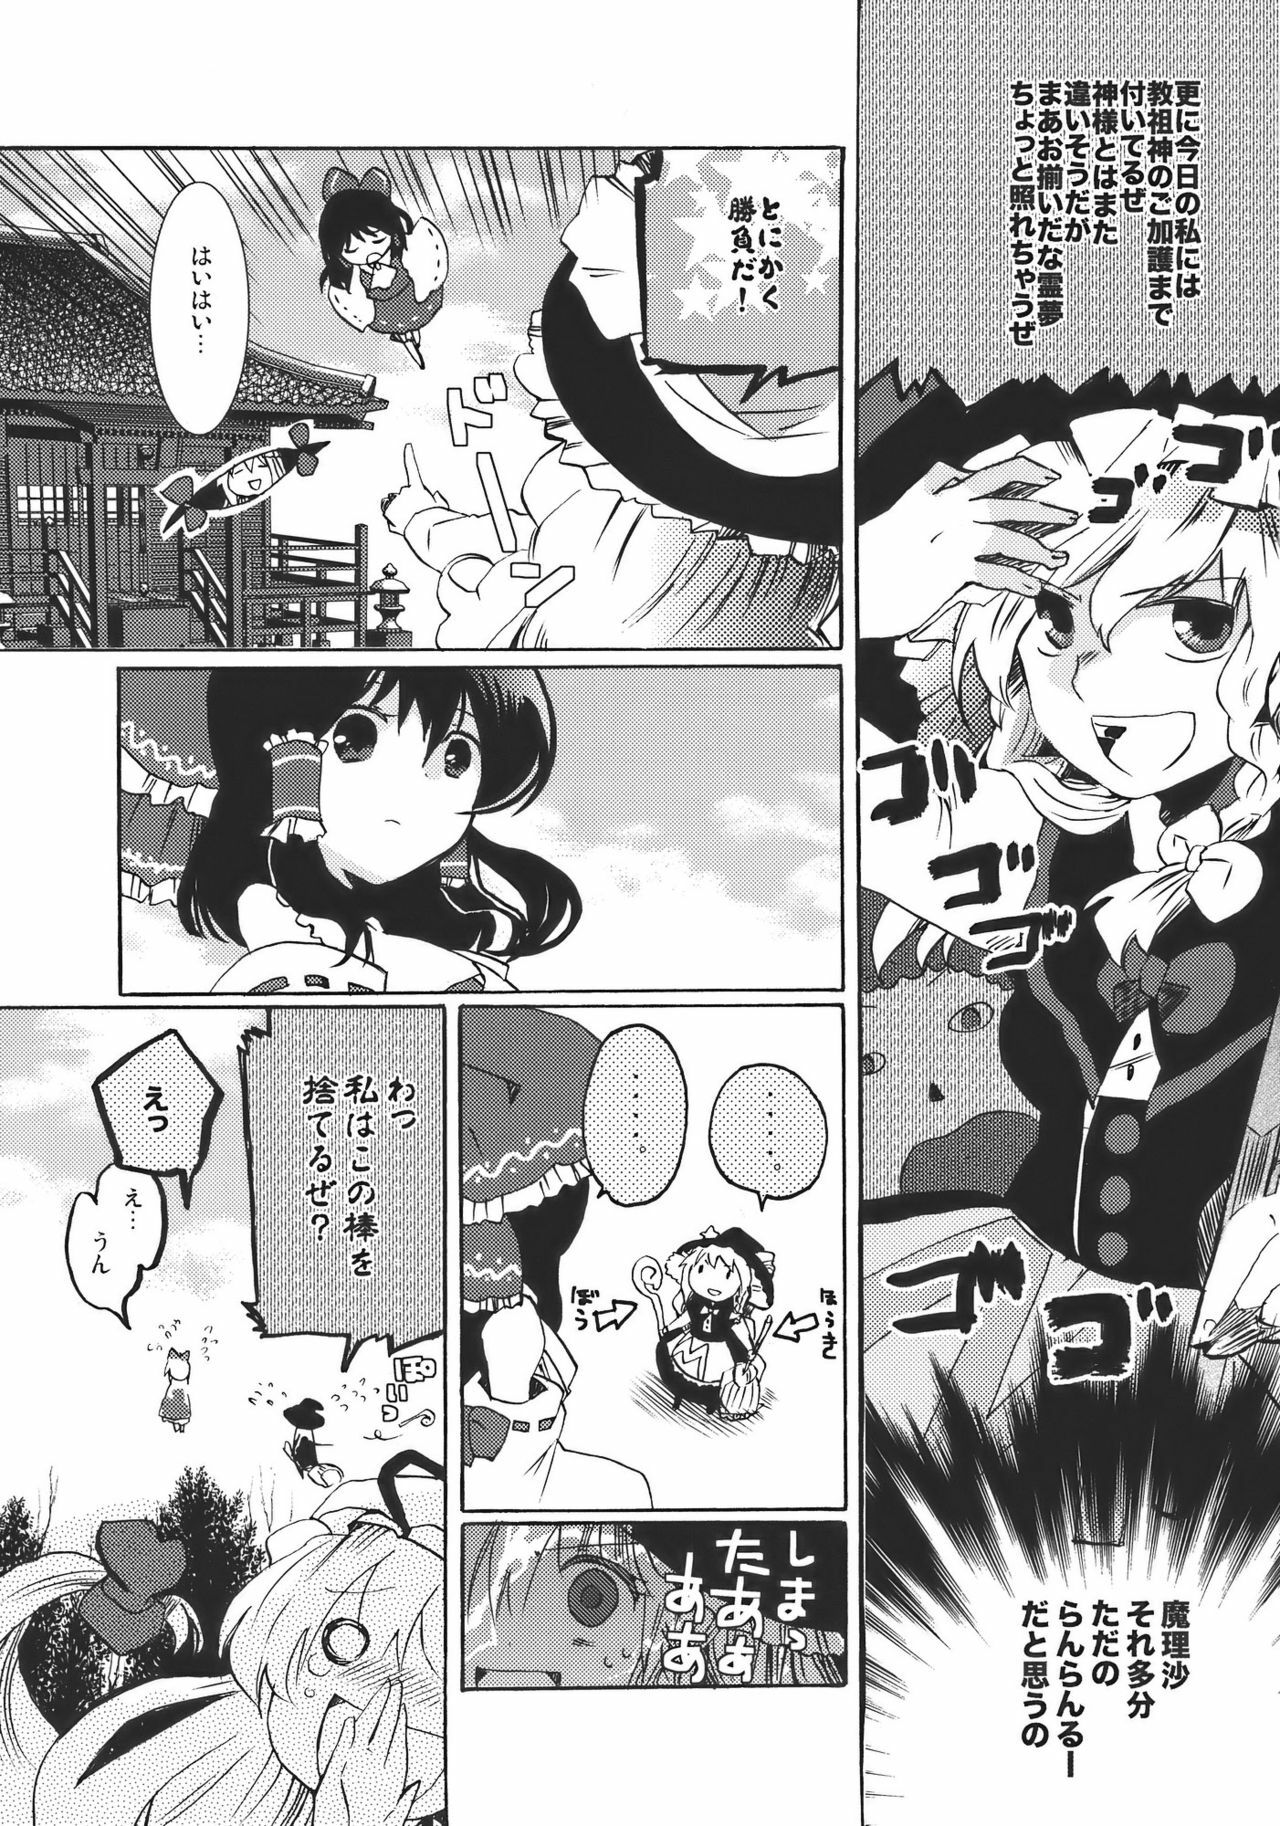 [Oimoto] Yumeiro Dolce (Touhou Project) page 13 full